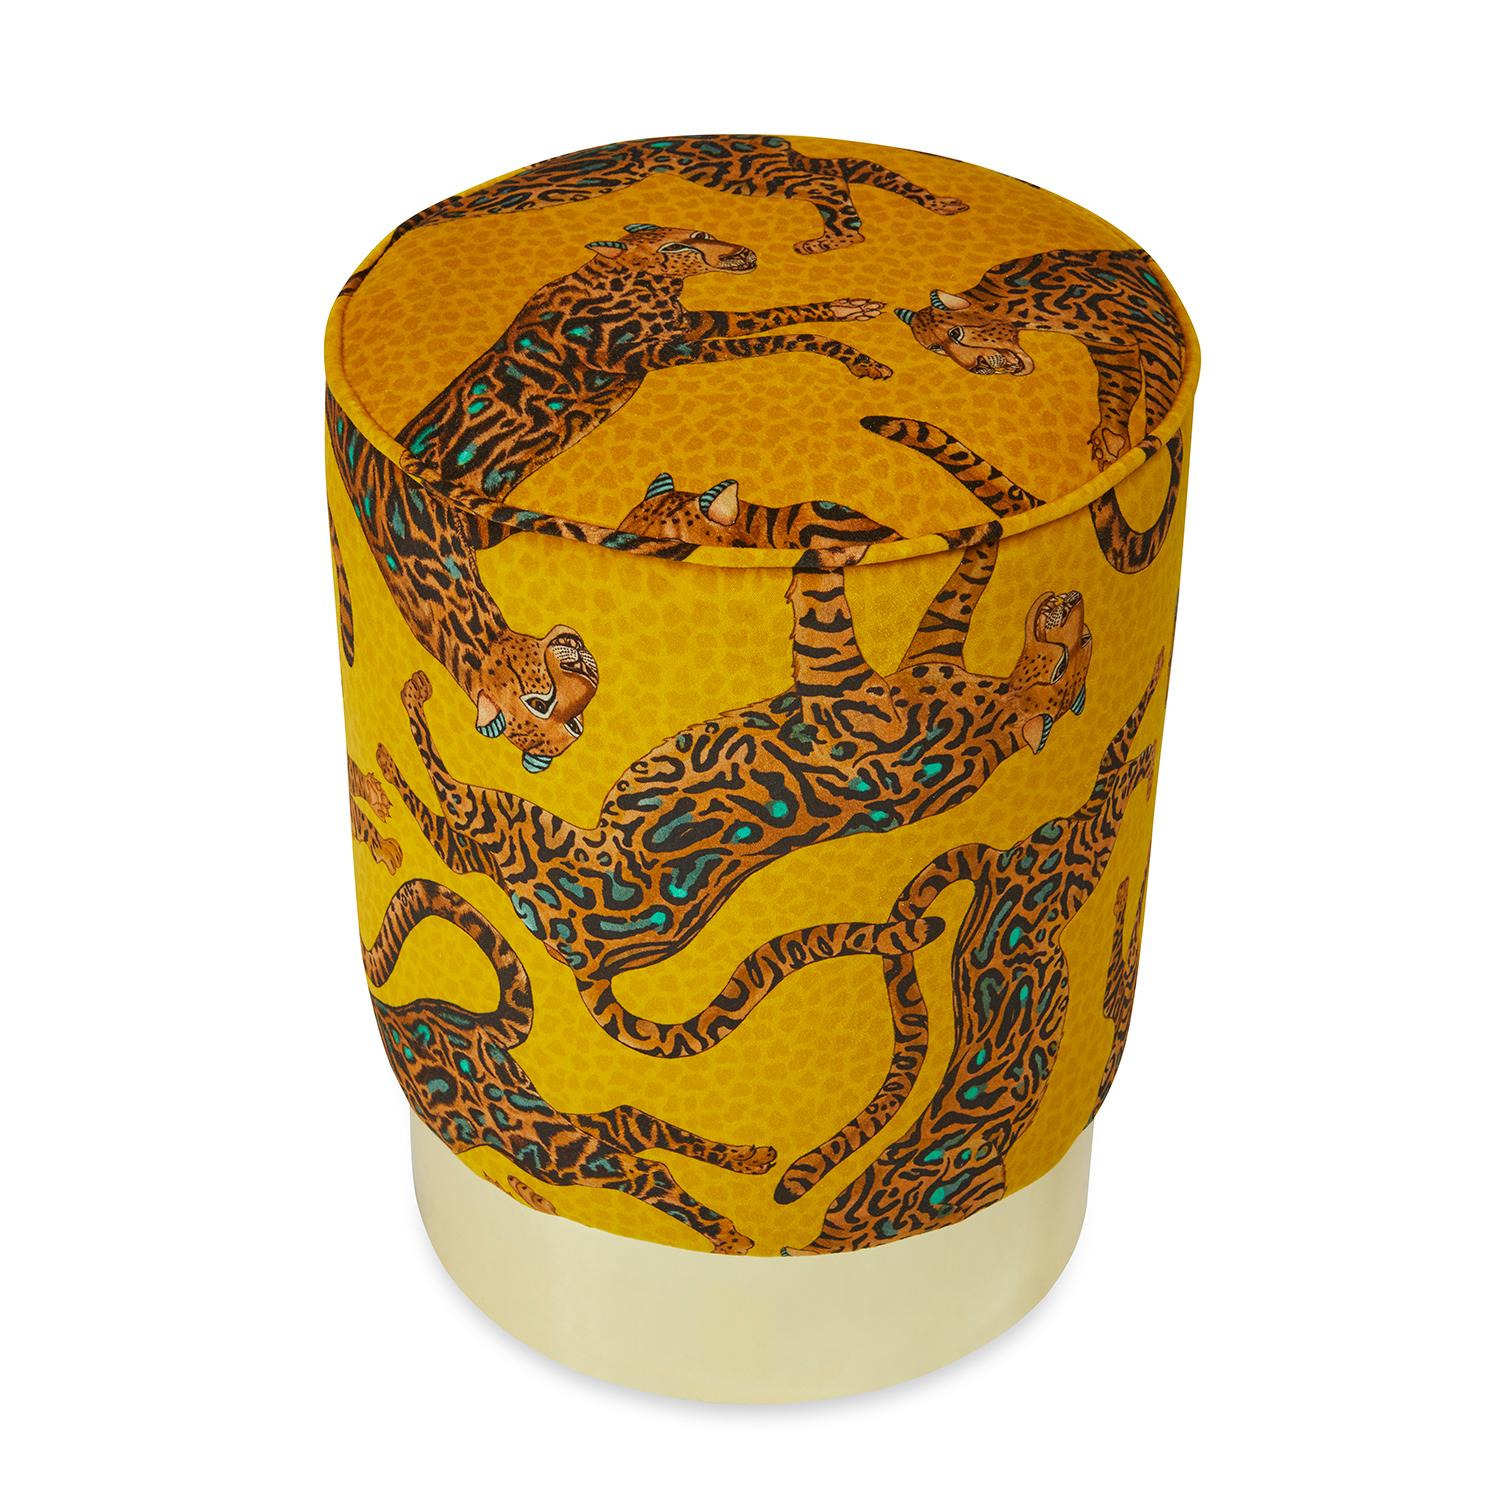 A luxurious Cheetah Kings Gold Velvet Fabric covered Pouff with a brass base.

Product information
DIMENSIONS: 15